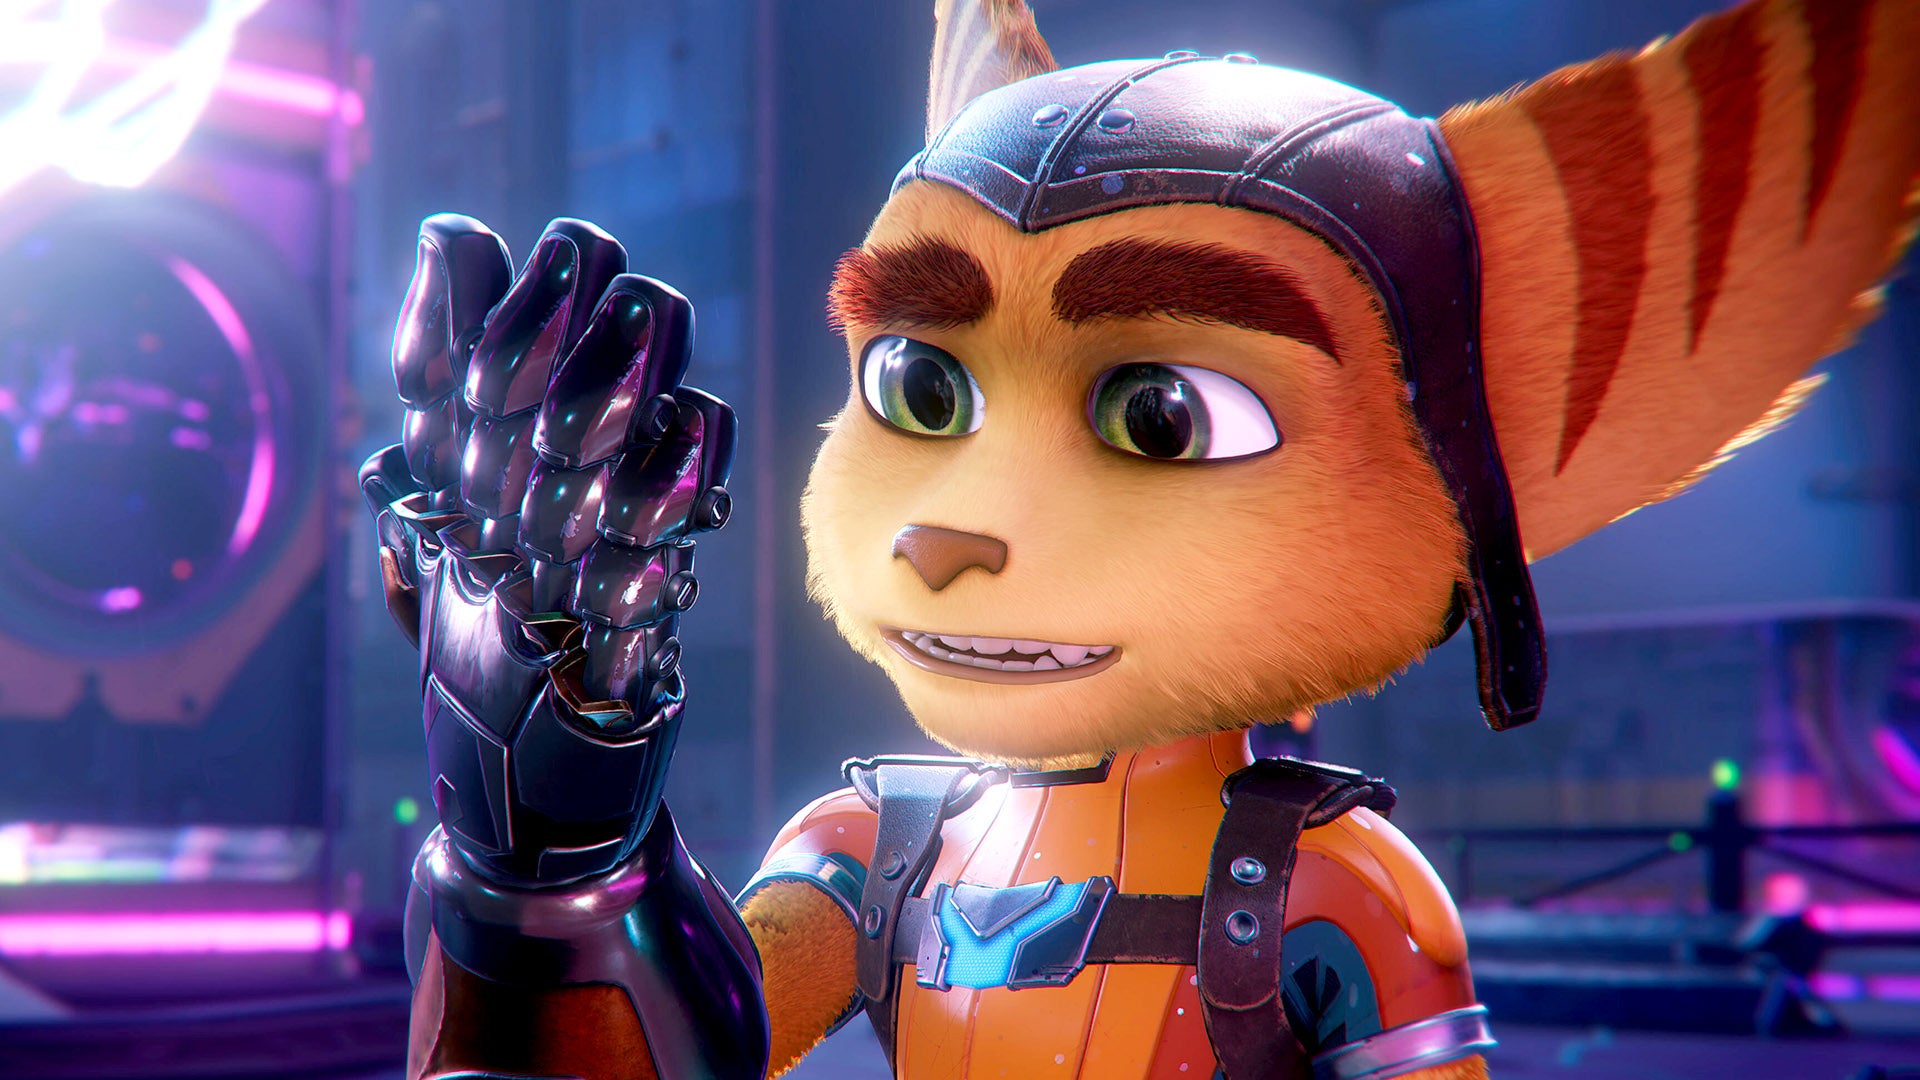 Image for Ratchet and Clank: Rift Apart - The Digital Foundry Tech Review